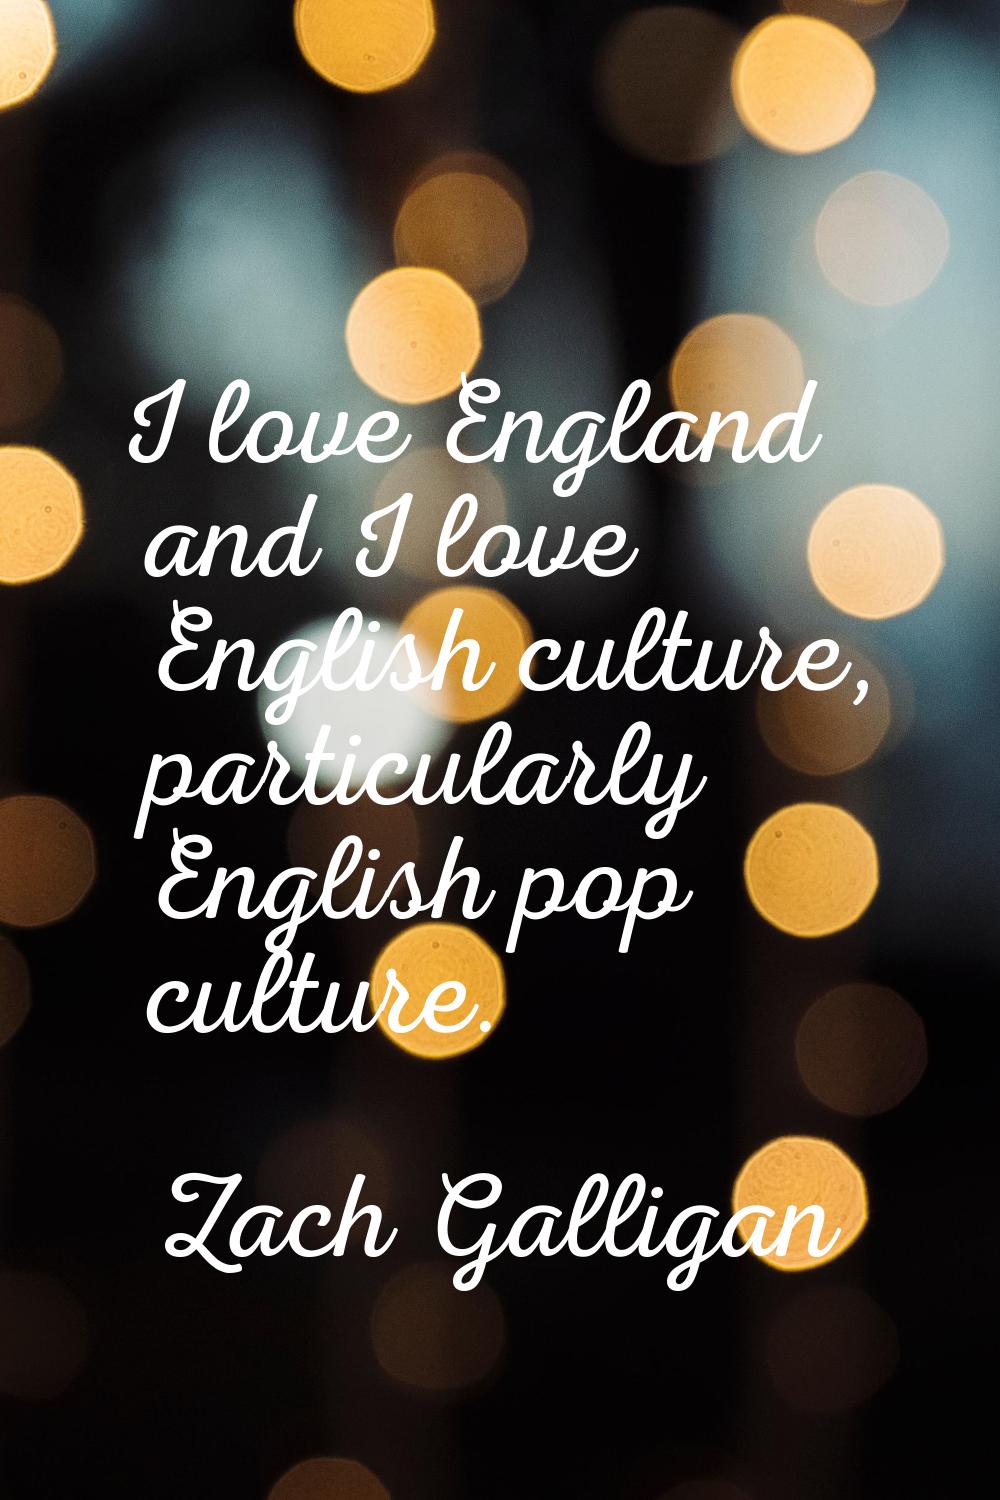 I love England and I love English culture, particularly English pop culture.